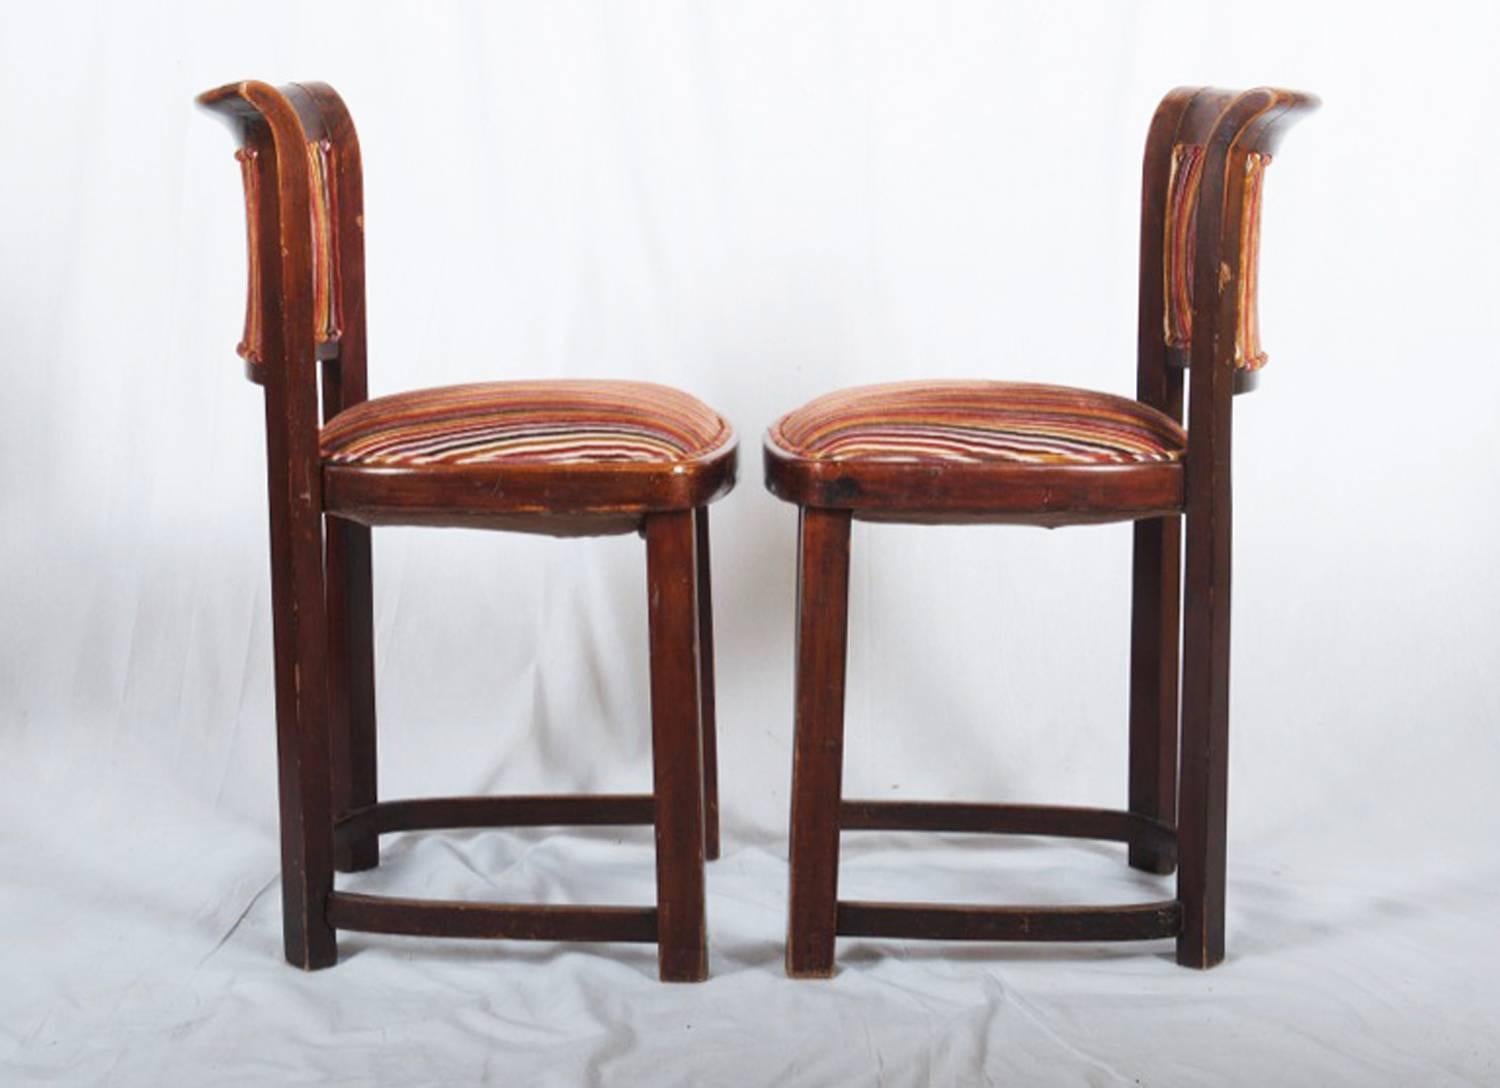 Vienna Secession Very Rare Thonet Chairs Attributed to Josef Hoffmann For Sale